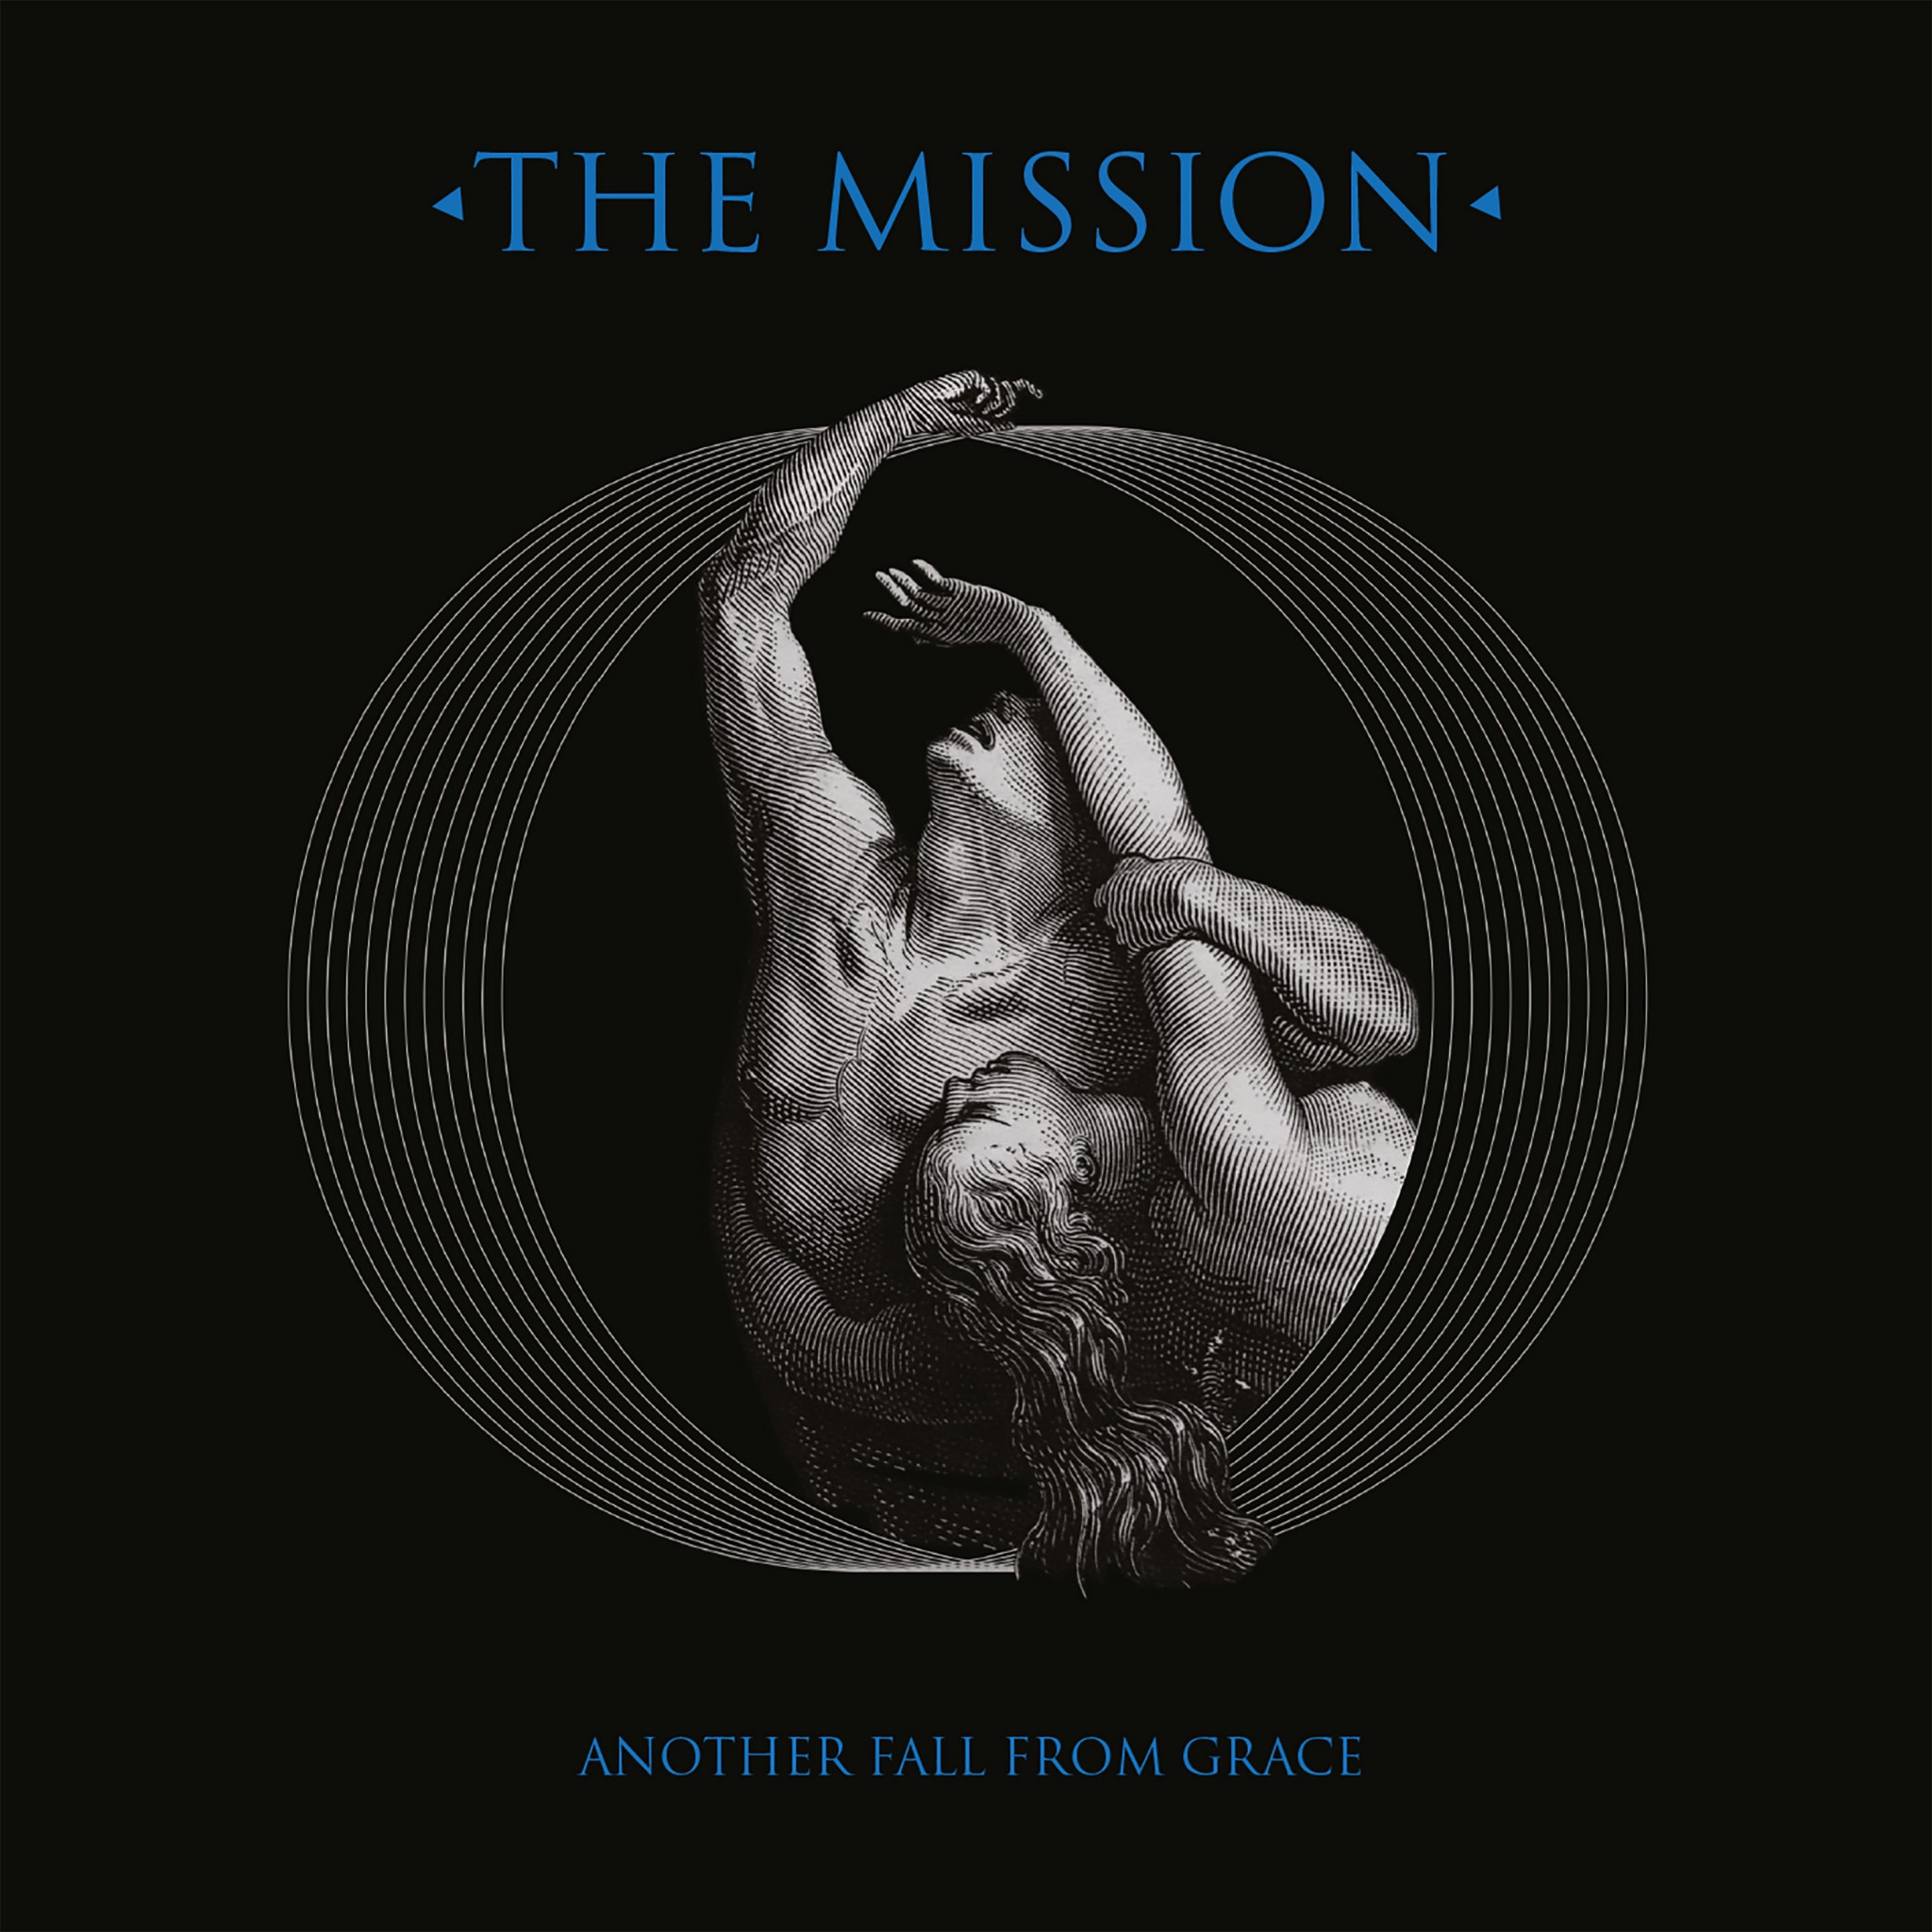 Fallen another. Missio album. The Mission. The Mission uk. The Mission Band.